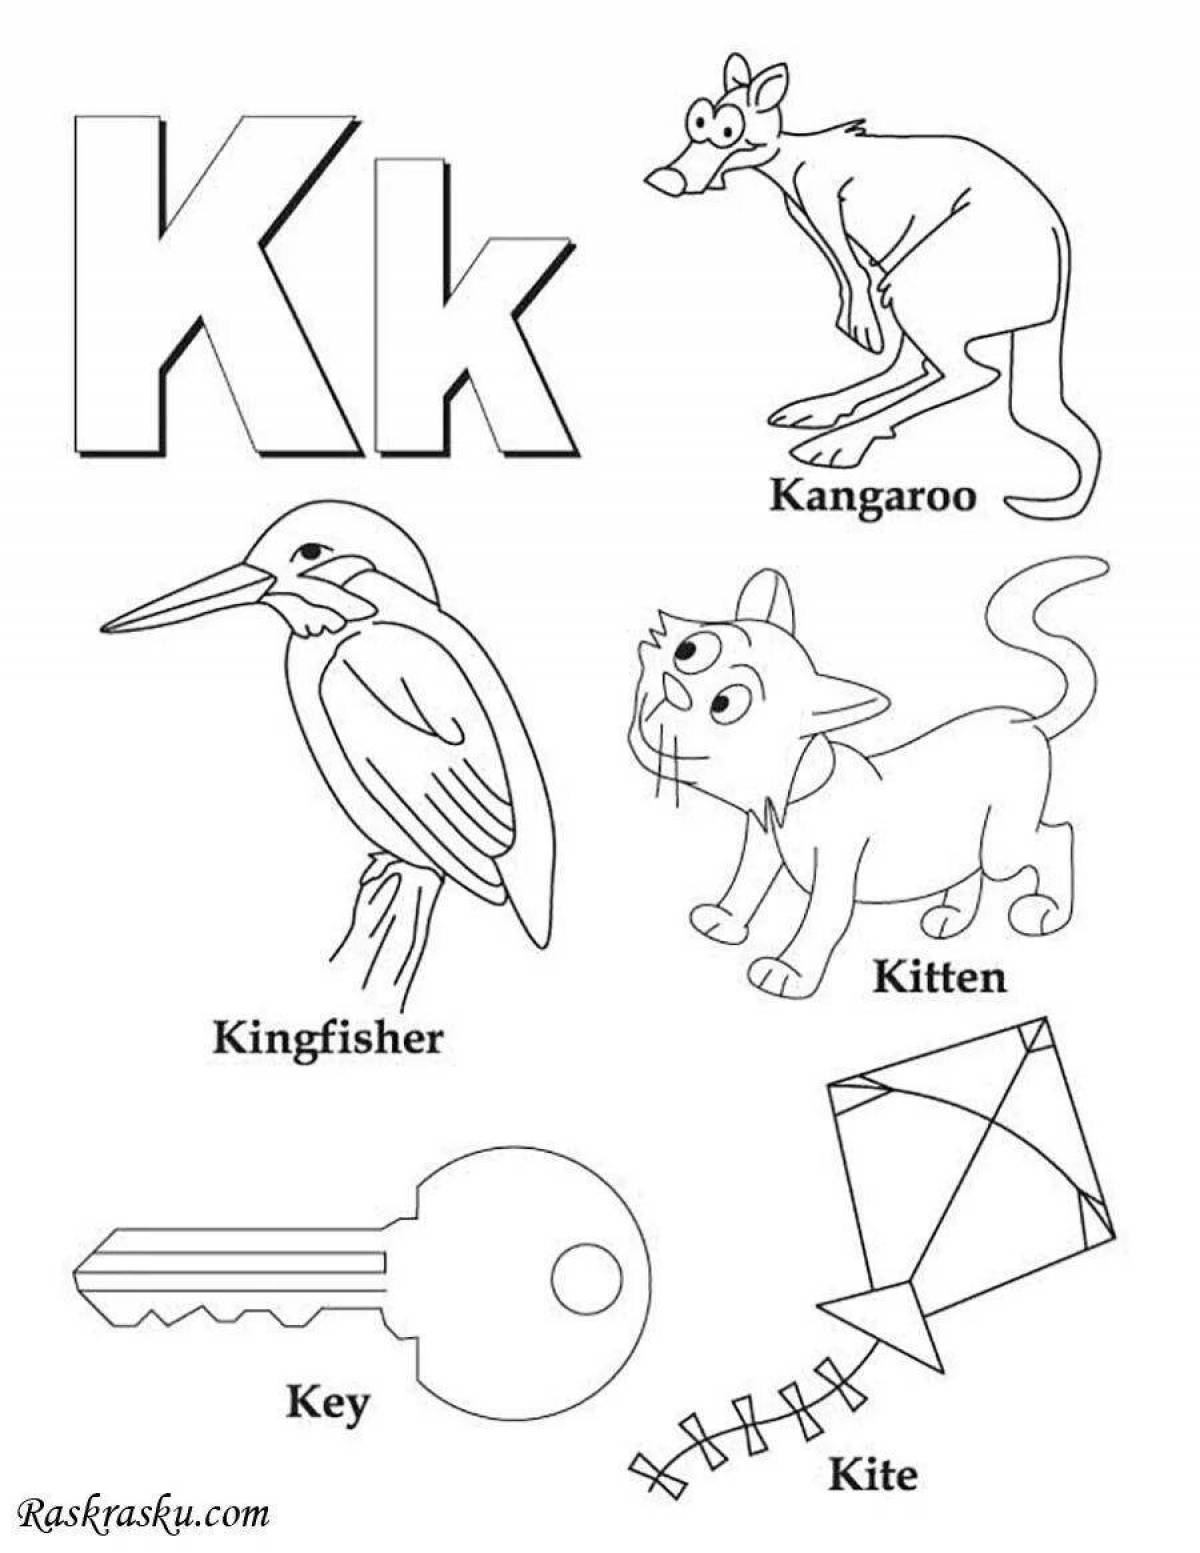 Colorful english letter coloring page for little learners